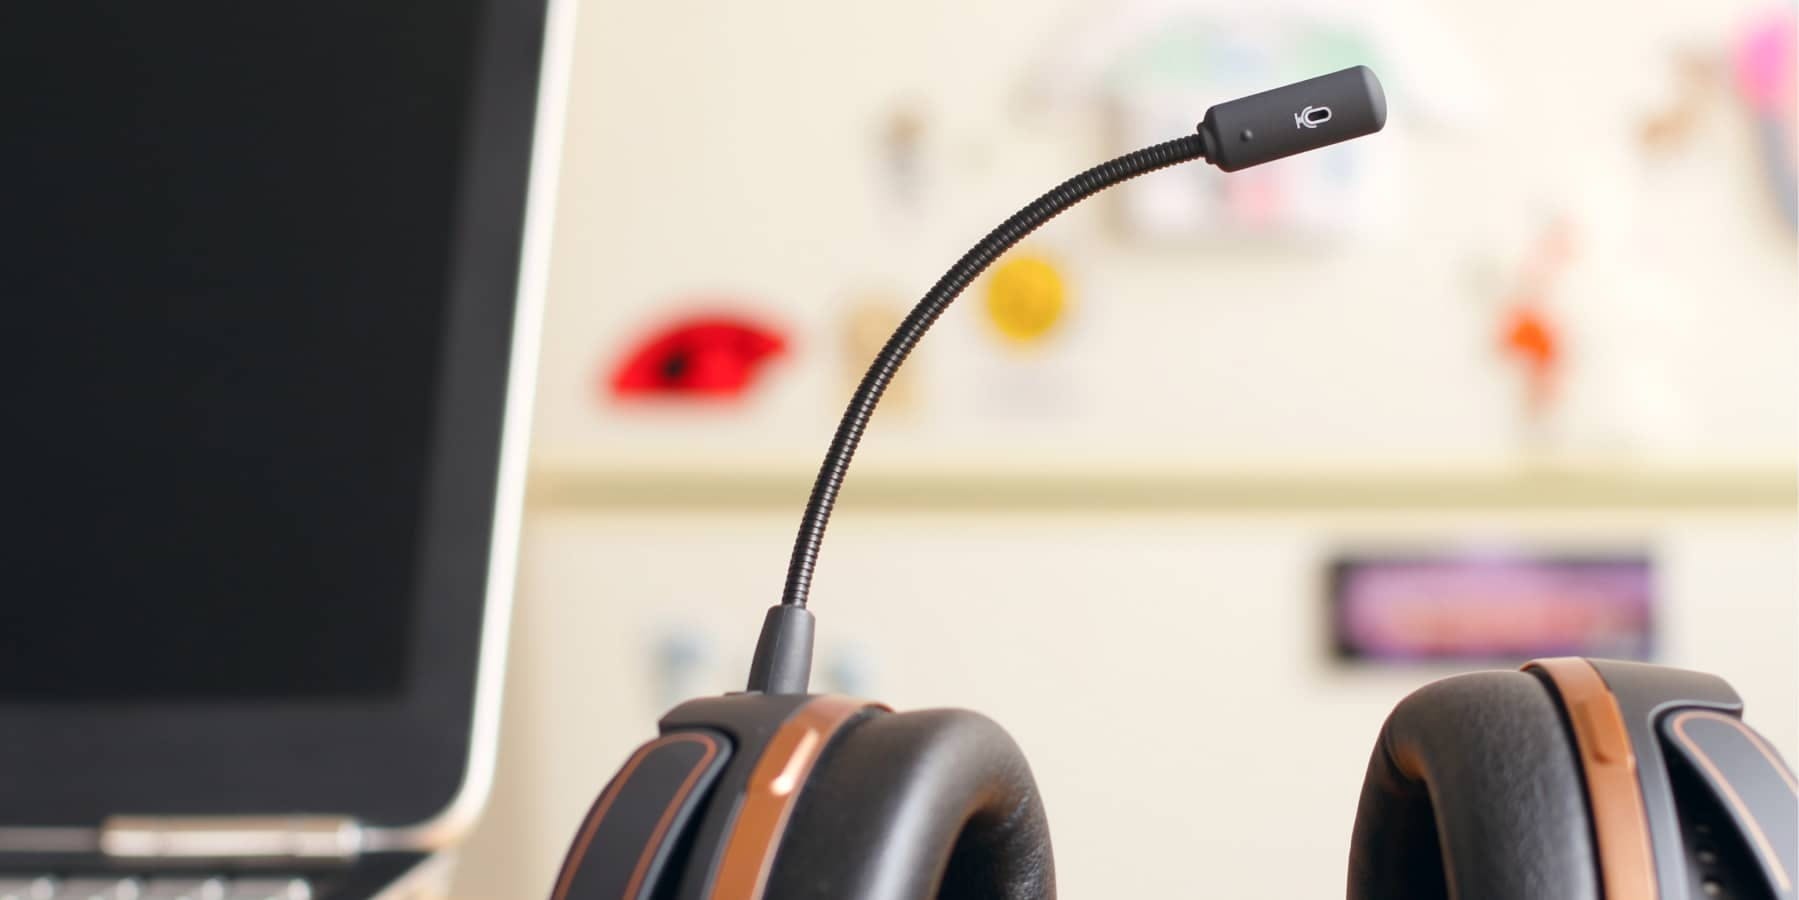 The 11 best headsets for conference calls in 2022 header